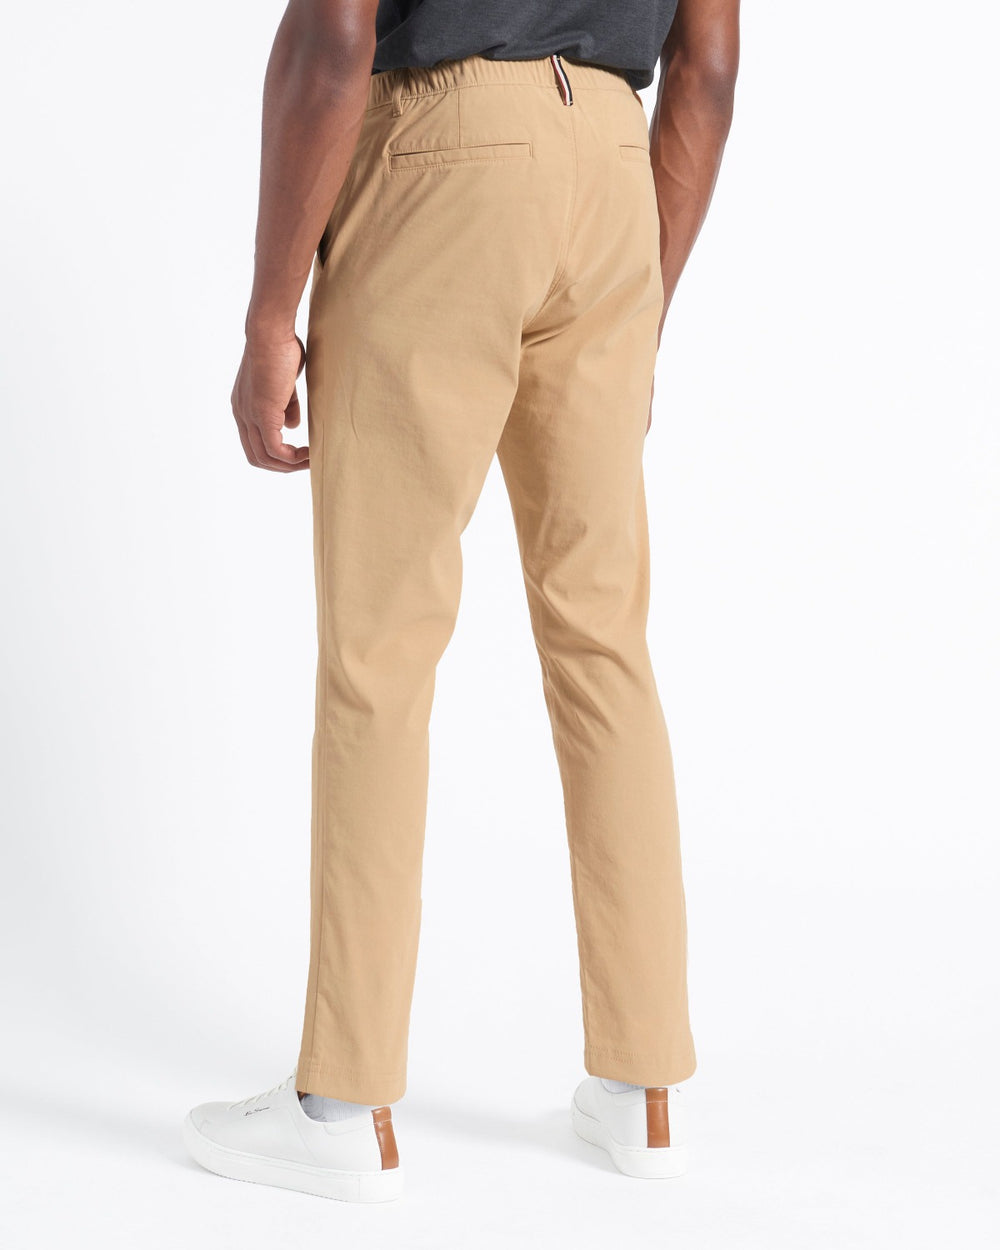 9 best work trousers for men  The Sun